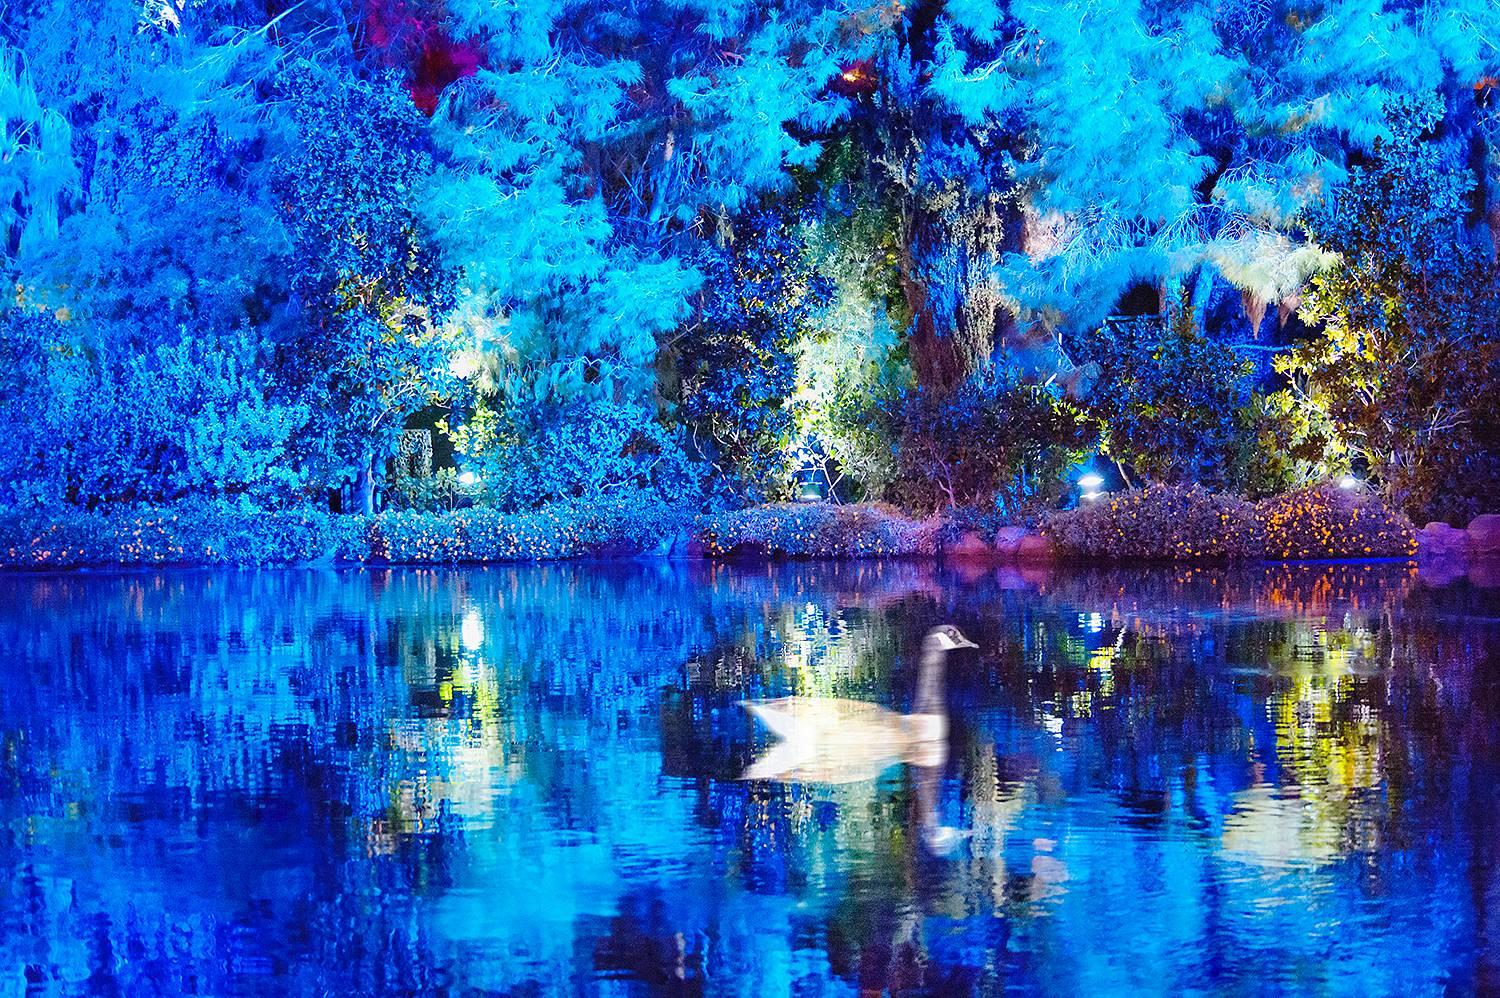 Mitchell Funk Landscape Photograph - Fairy tale Blue Duck Glides on a Magical Blue Pond